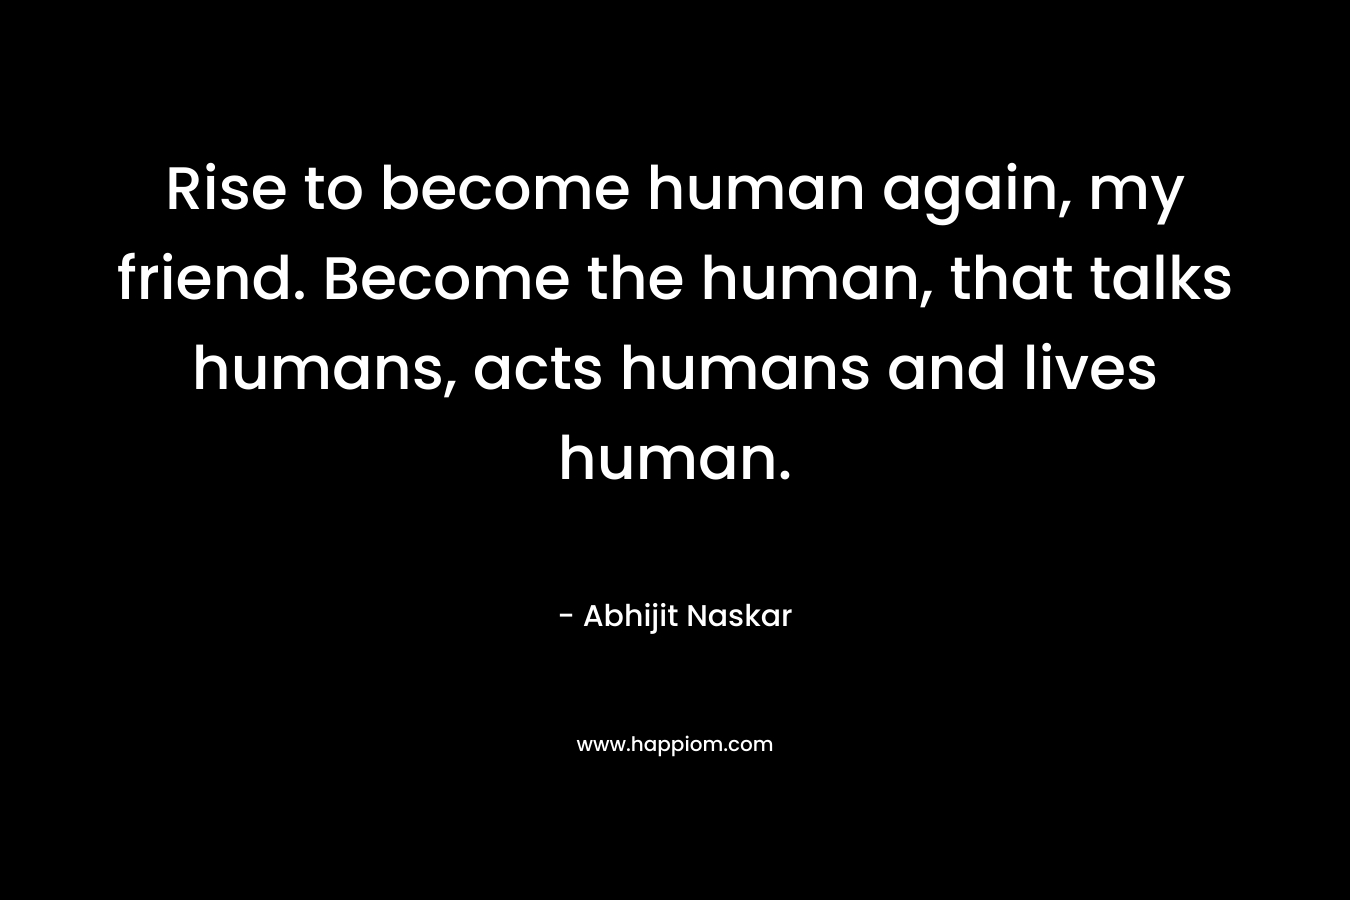 Rise to become human again, my friend. Become the human, that talks humans, acts humans and lives human.